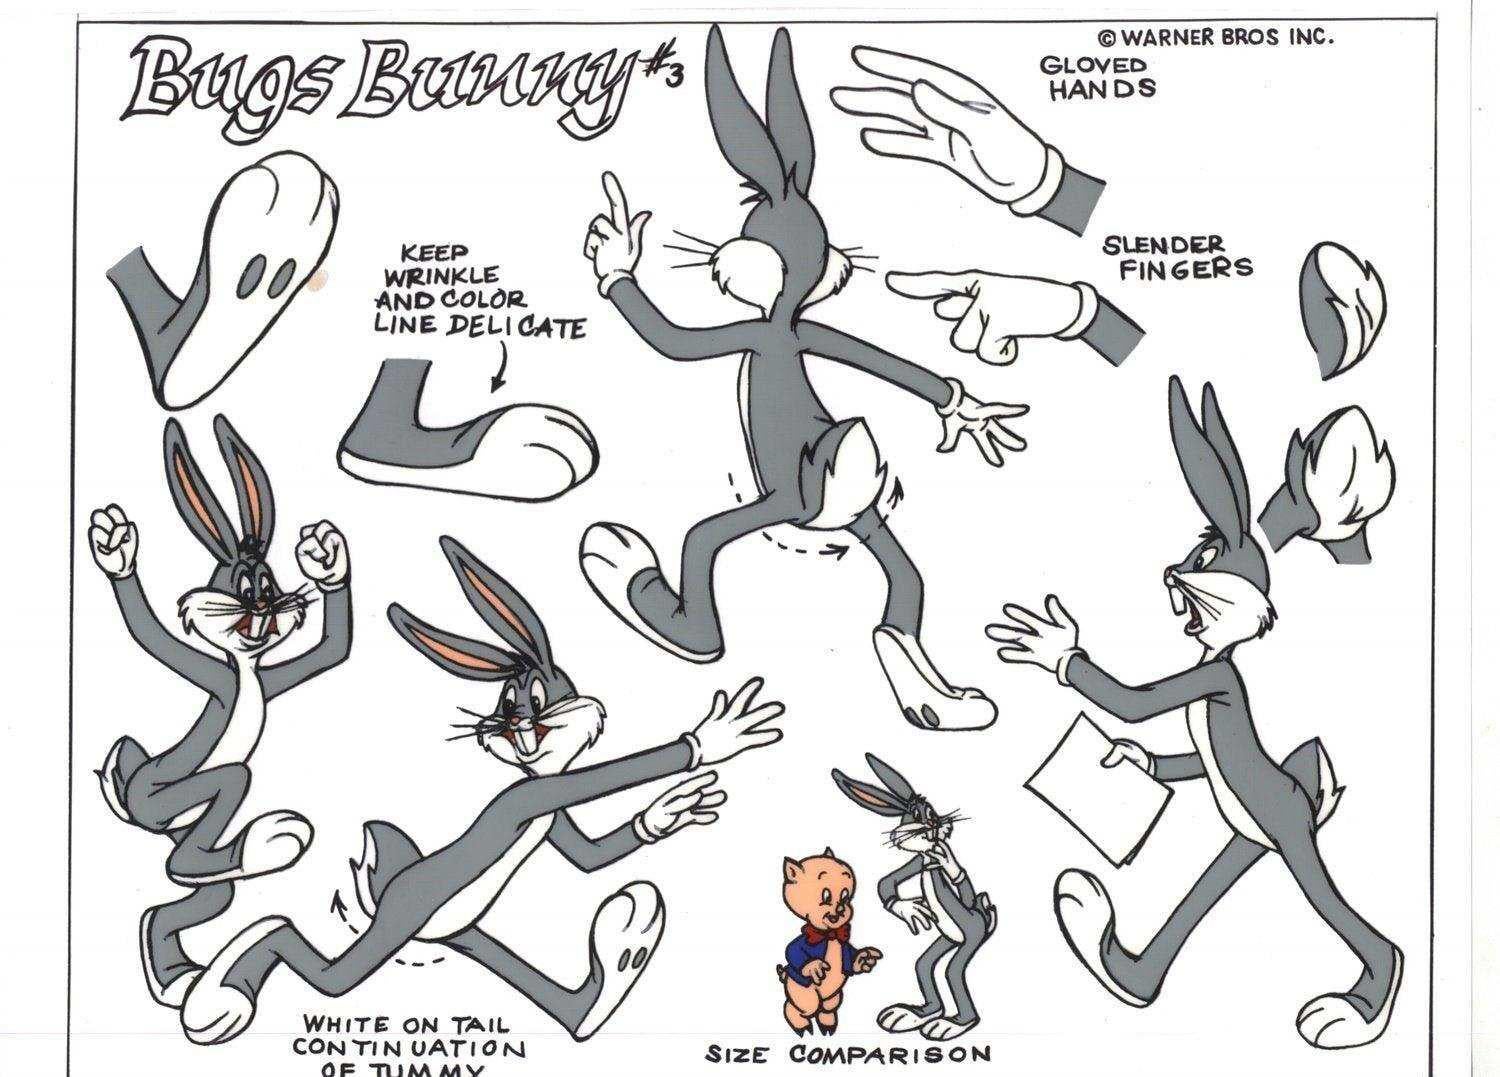 Bugs Bunny Hand-Painted Model Sheet - Art by Looney Tunes Studio Artists